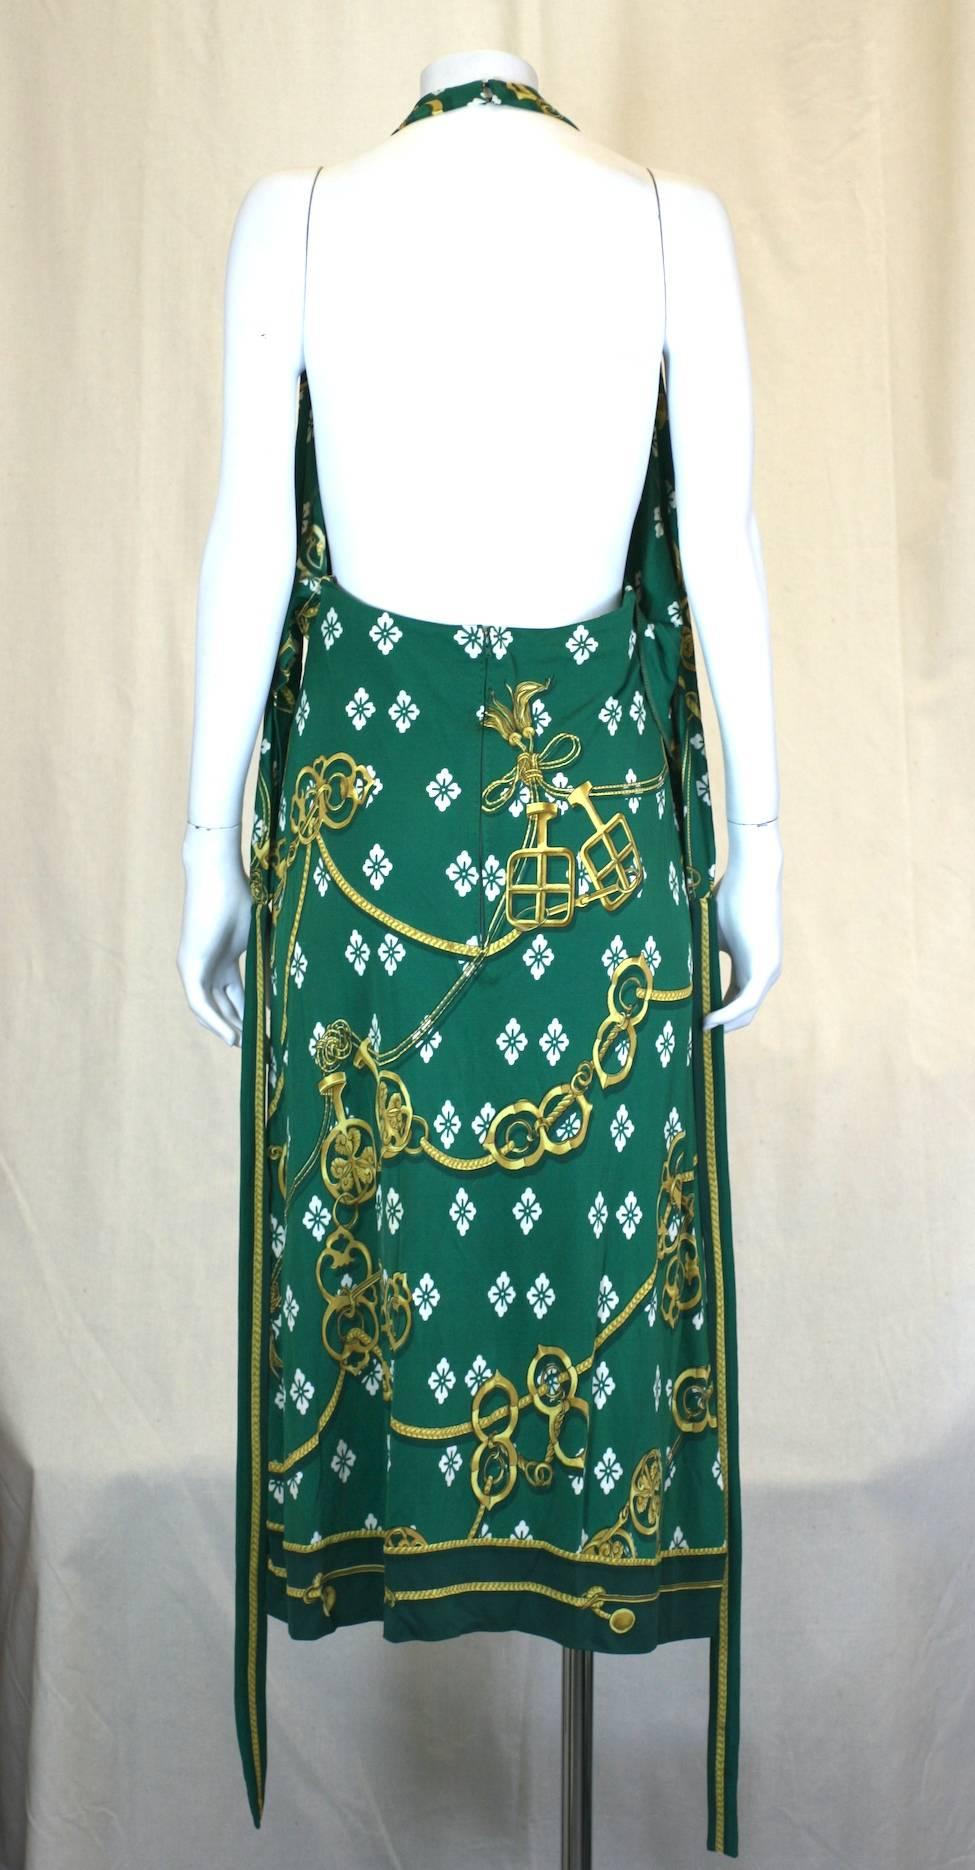 Hermes Silk Jersey Halter Dress In Excellent Condition For Sale In New York, NY